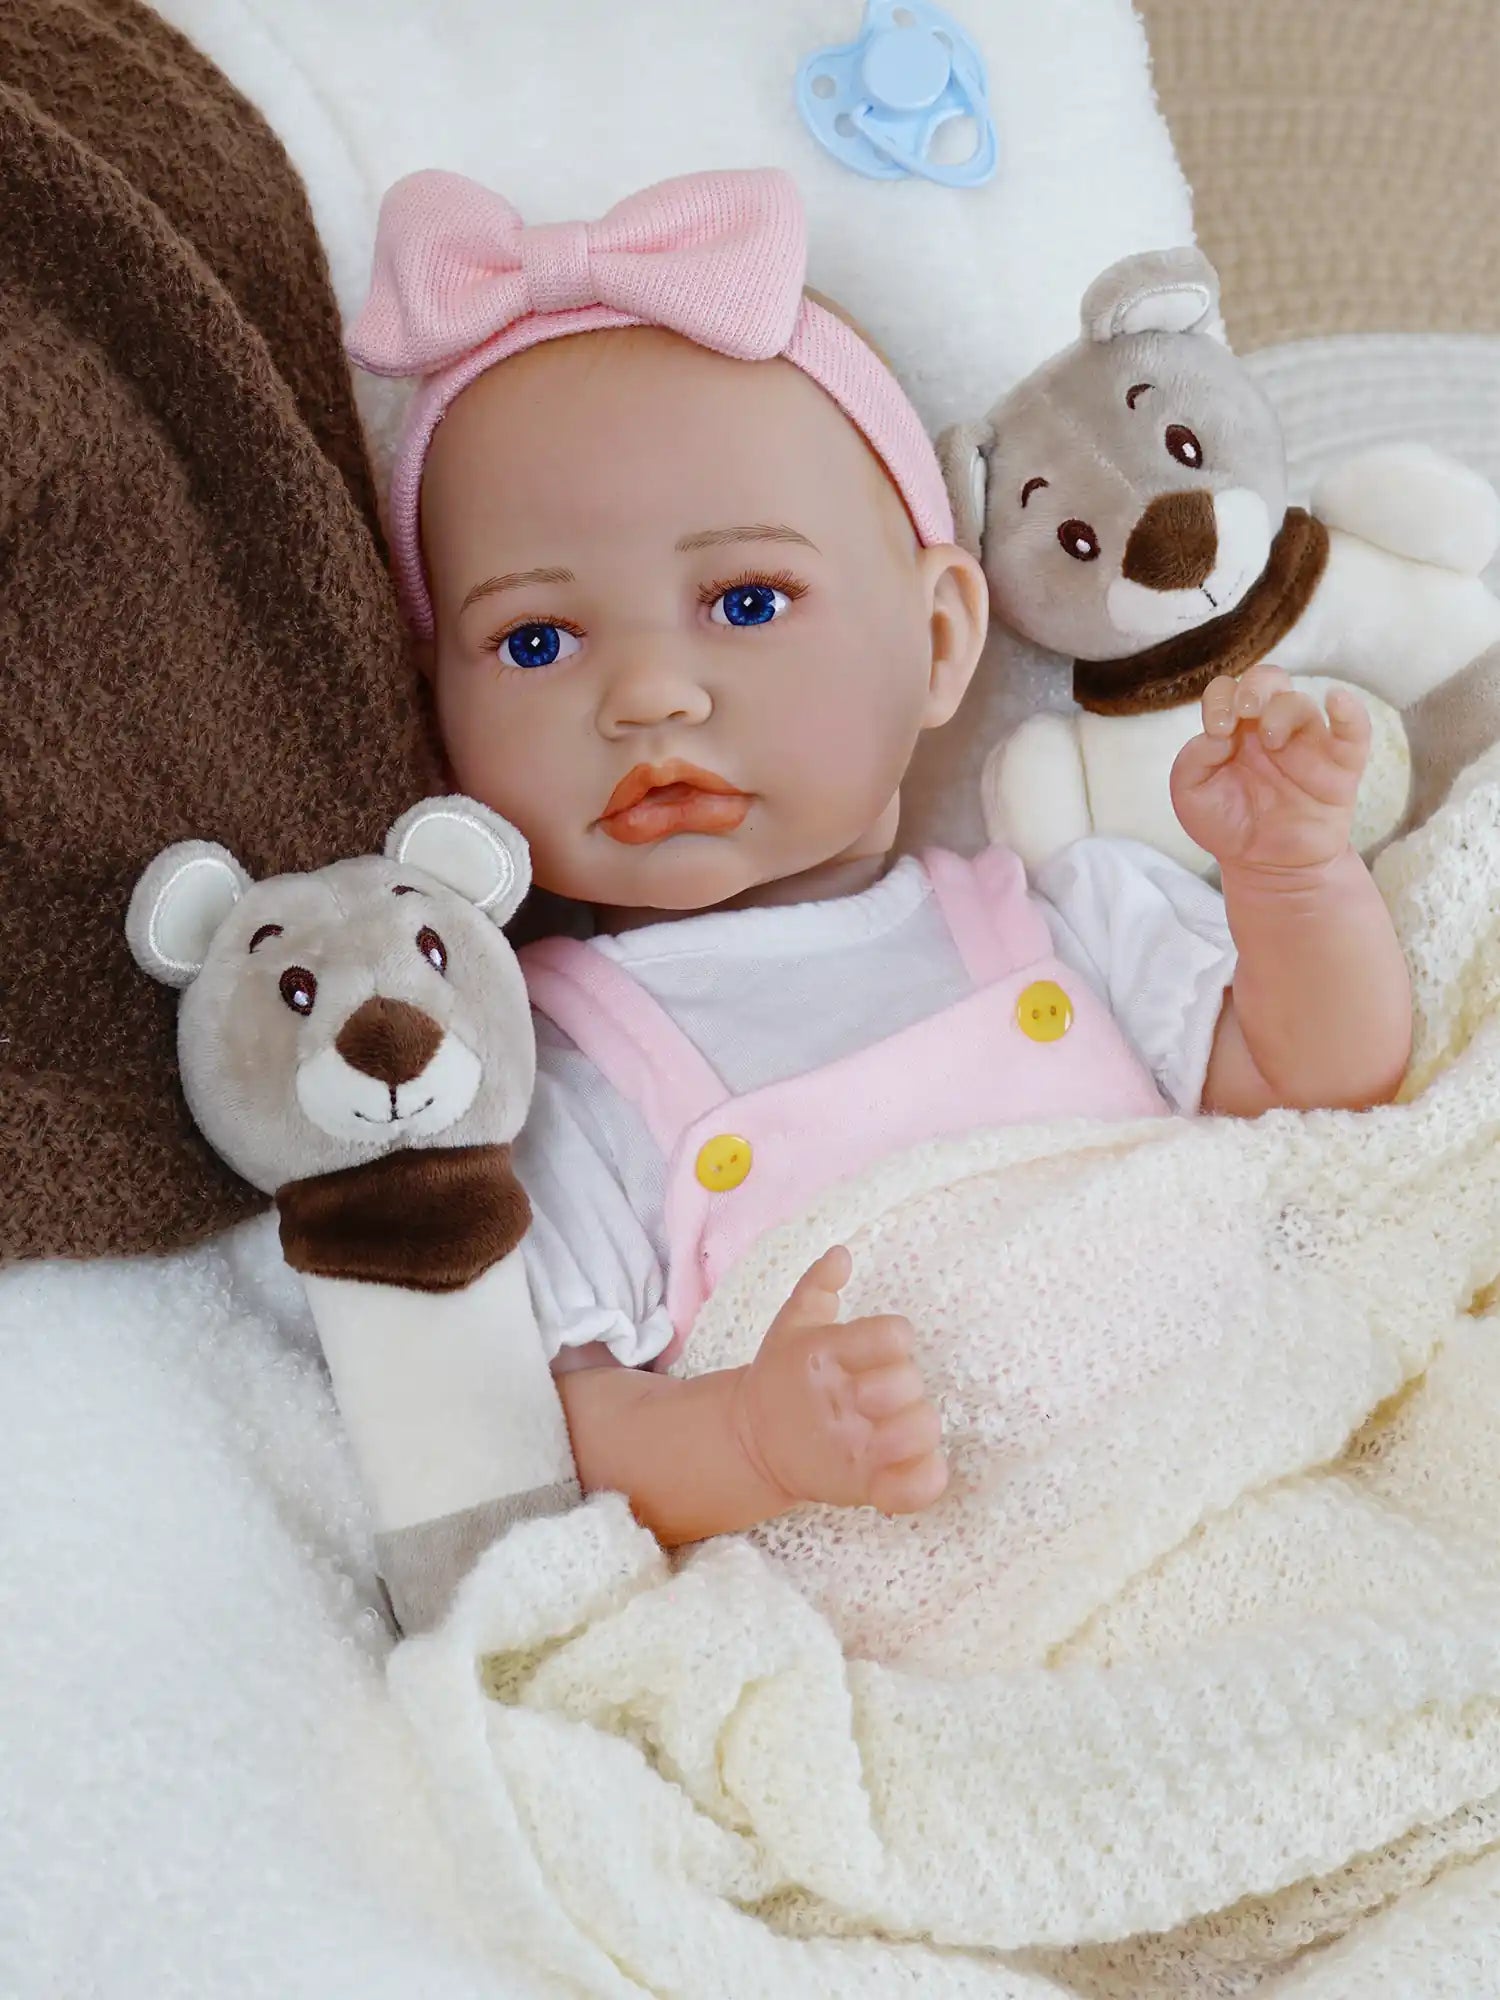 Lifelike doll with pink bow and plush toys.